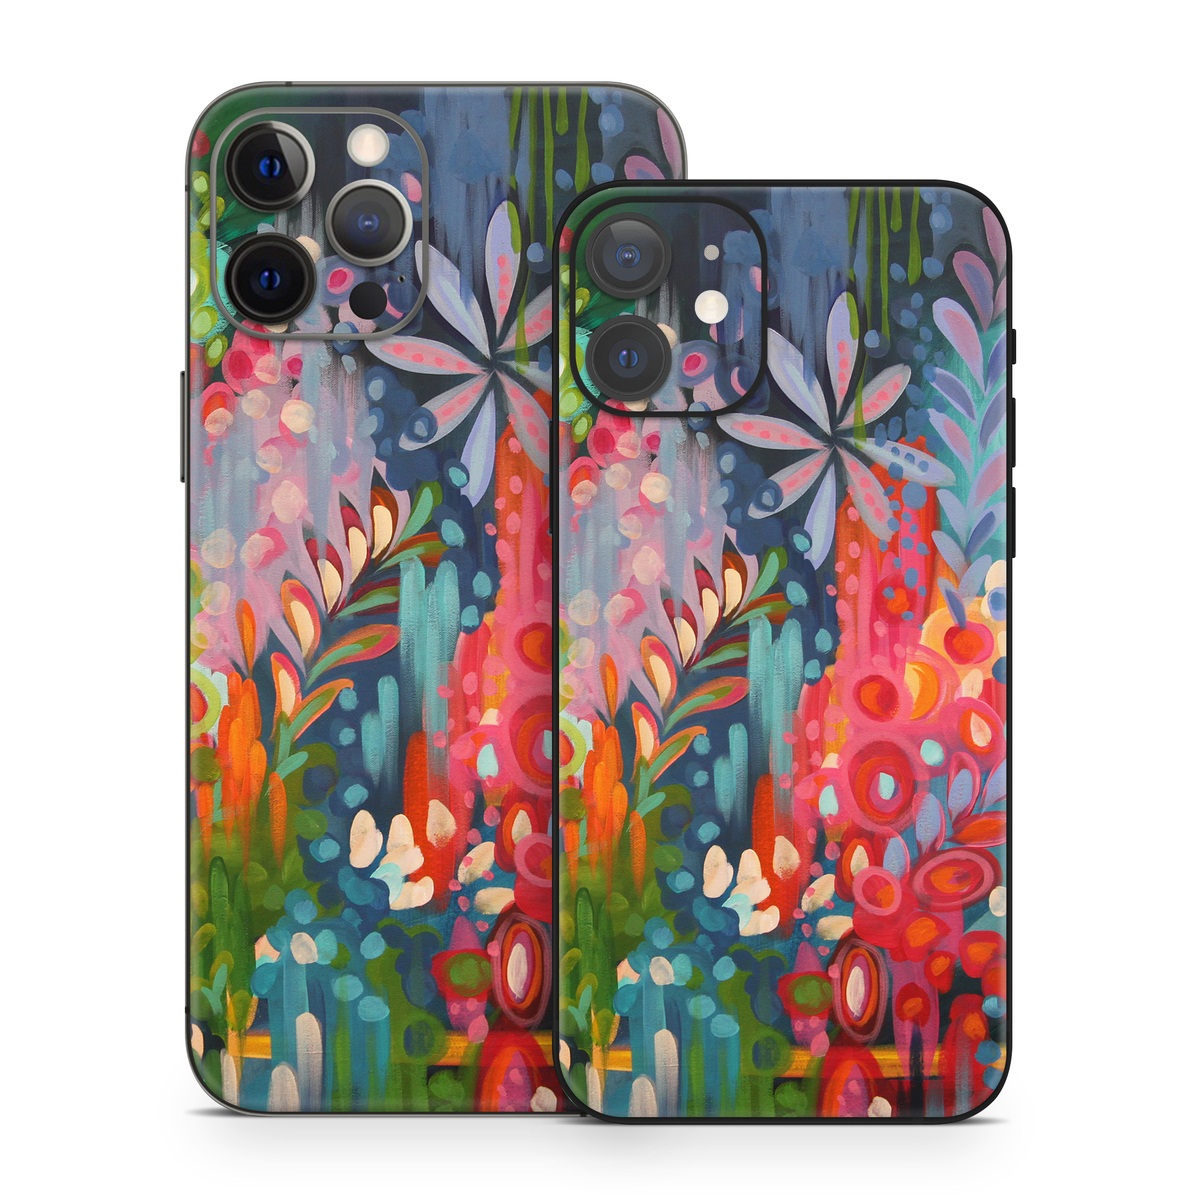 iPhone 12 Skin design of Painting, Modern art, Acrylic paint, Art, Visual arts, Watercolor paint, Child art, Flower, Plant, Tree with blue, red, orange, purple, yellow, pink, green colors